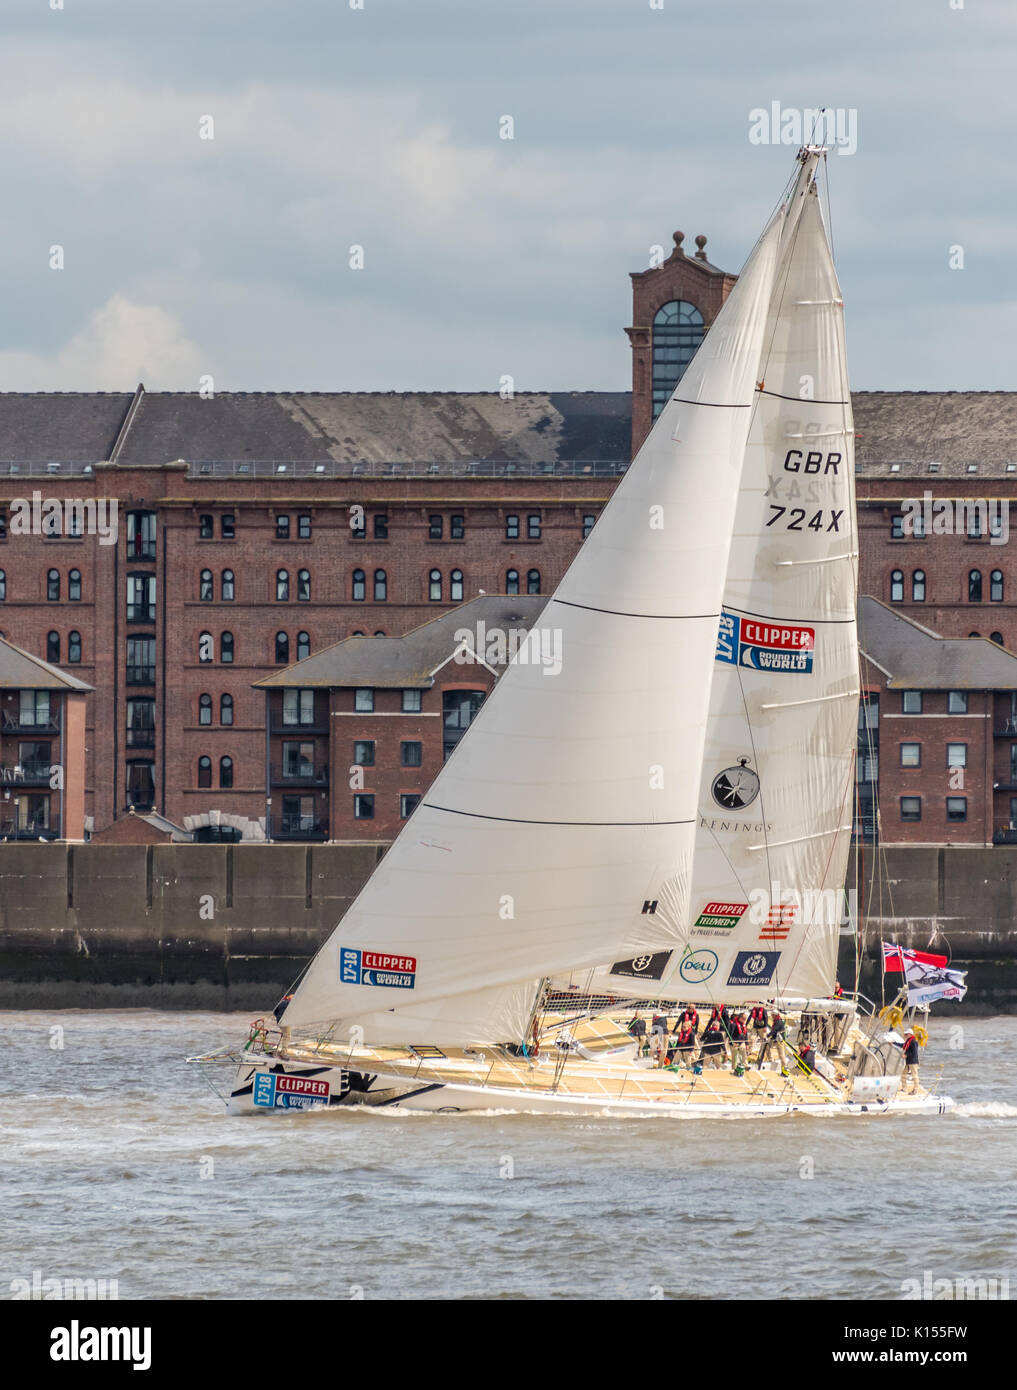 Start of the Clipper Round the world Race 2017 Stock Photo